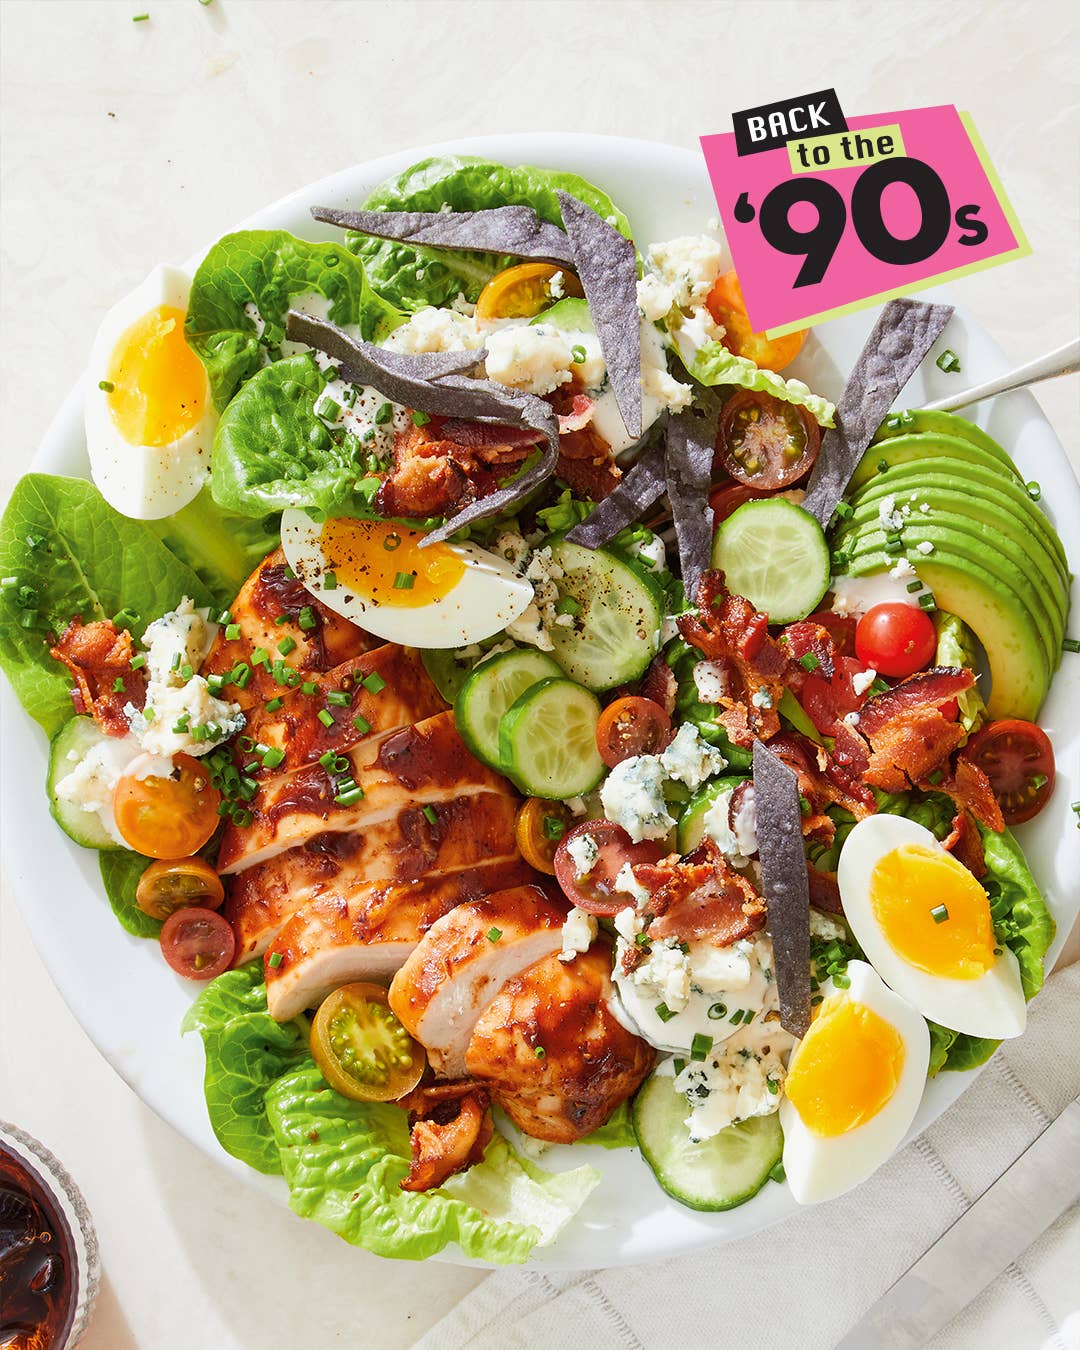 Snoop’s BBQ Chicken Cobb Salad with All the Good Stuff